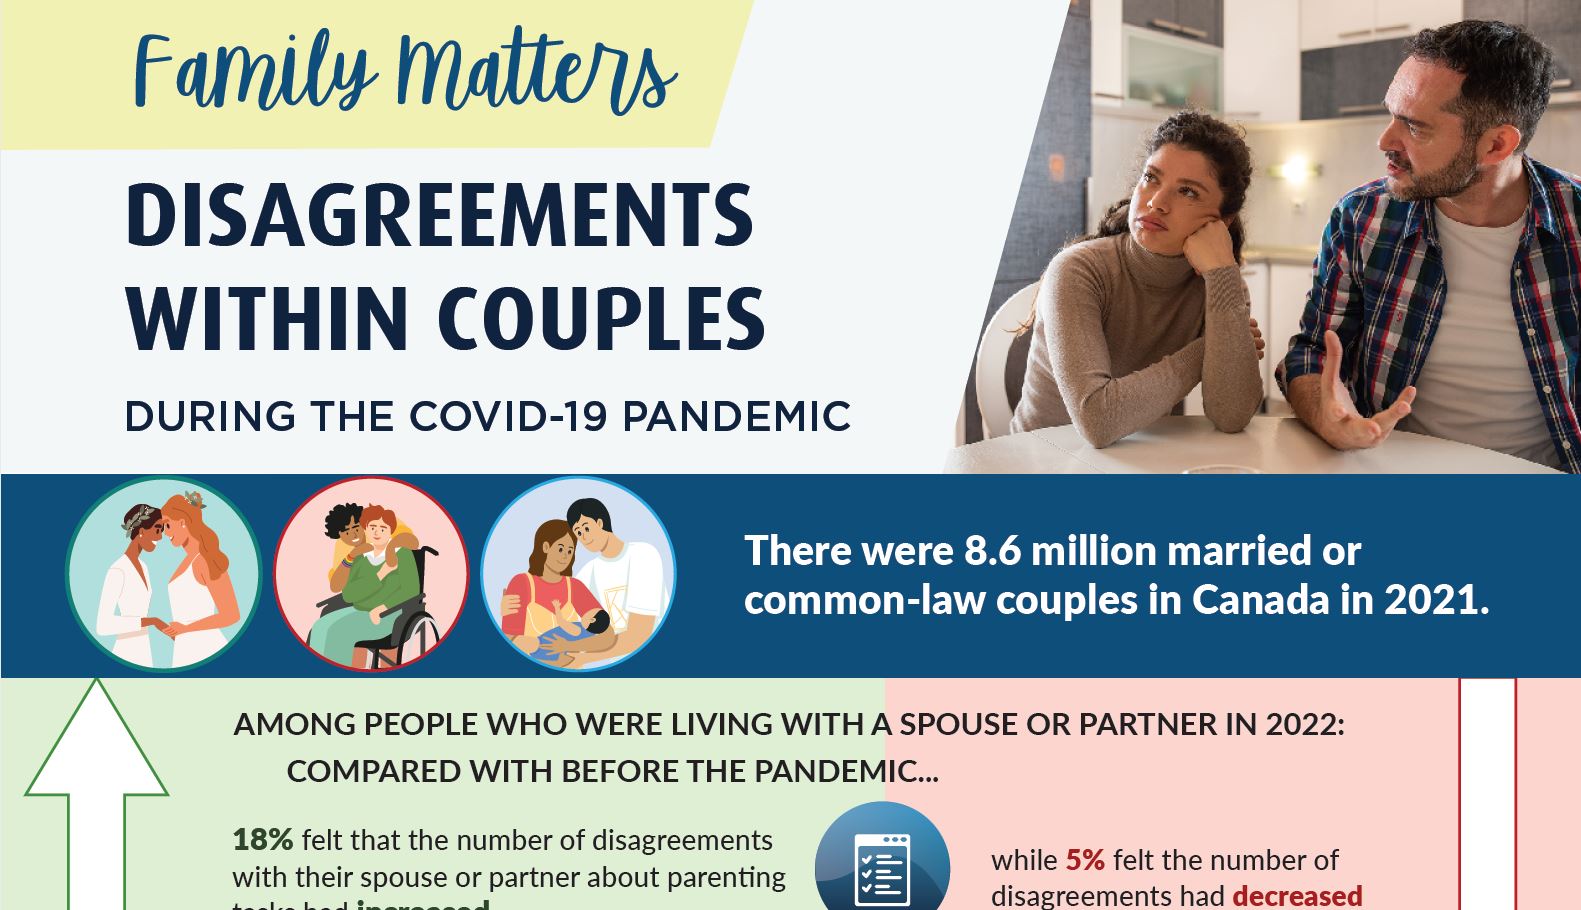 Family Matters: Disagreements within couples during the COVID-19 pandemic